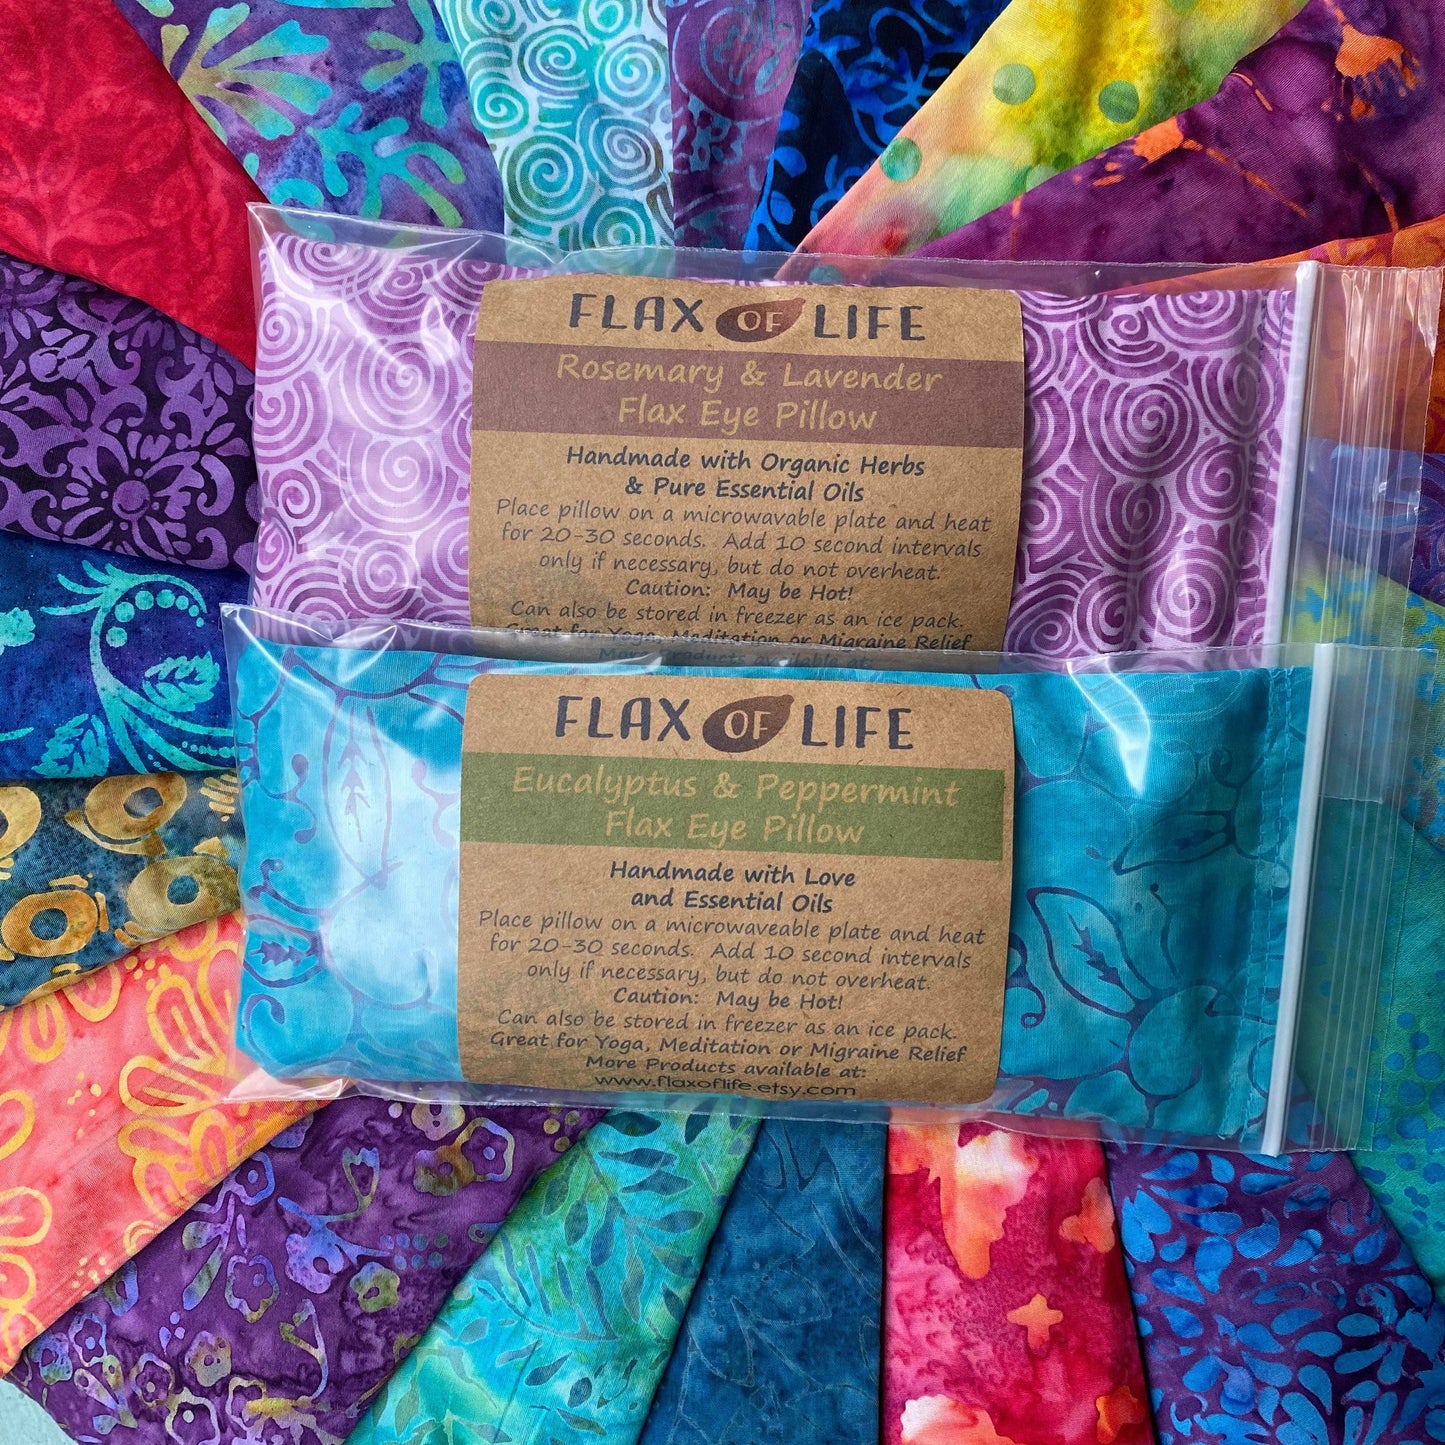 40 Hand-Dyed Batik Flax Eye Pillows with Optional Covers